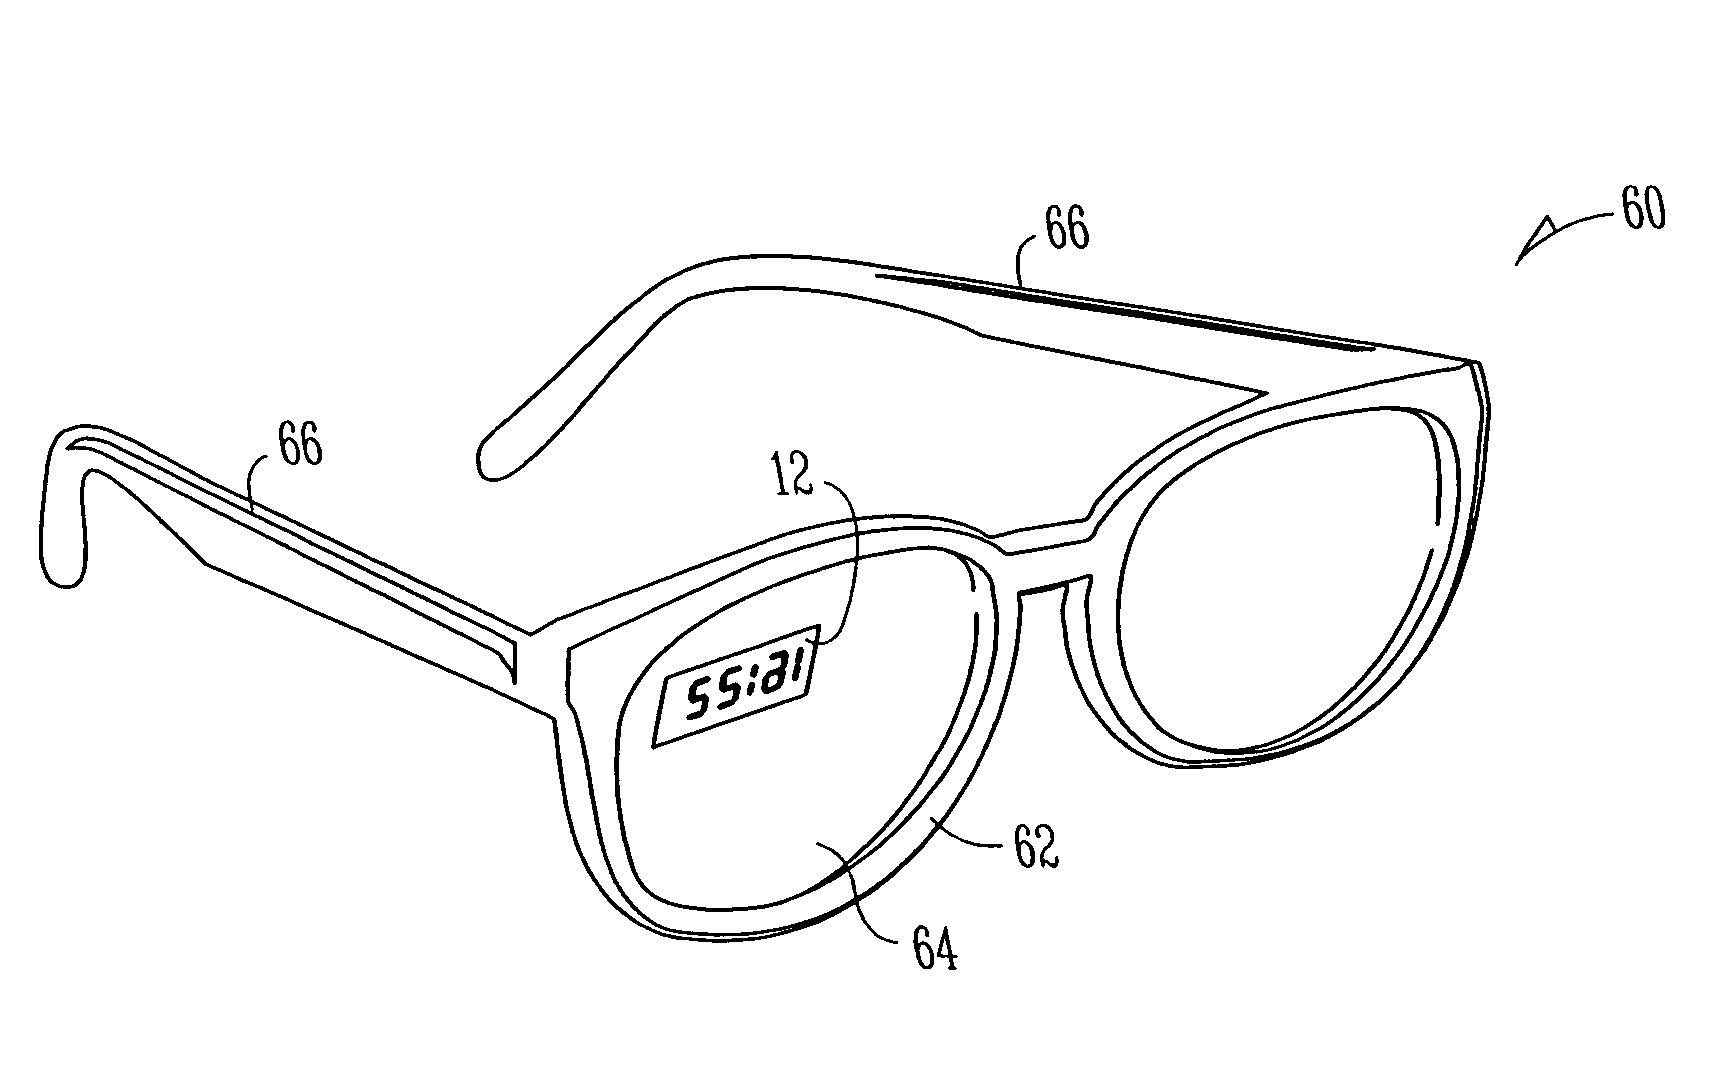 System and method for displaying information on athletic eyewear